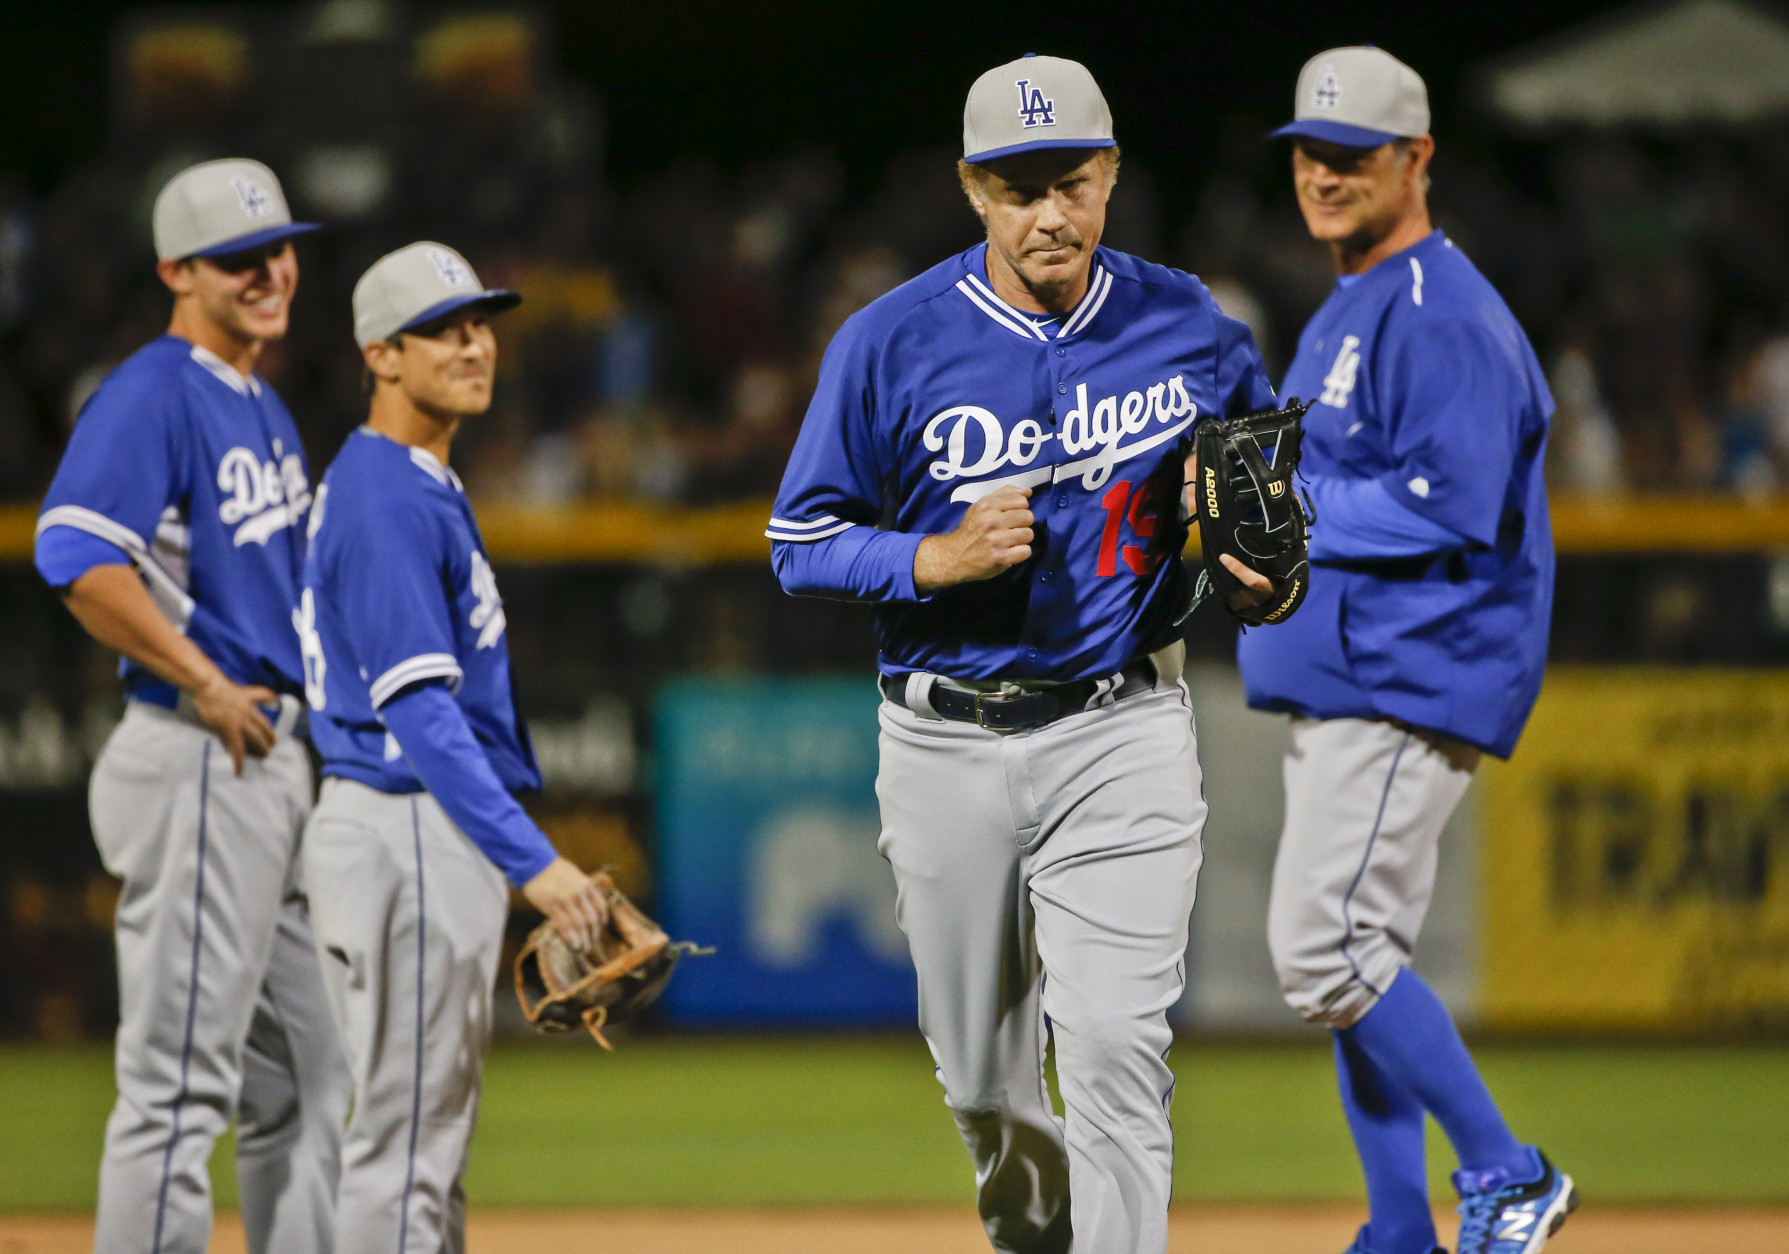 Actor Will Ferrell jogs from the pitcher's mound after being removed from the game by Los Angeles Dodgers manager Don Mattingly, right, during a spring training baseball game between the San Diego Padres and the Dodgers Thursday, March 12, 2015, in Peoria, Ariz. (AP Photo/Lenny Ignelzi)